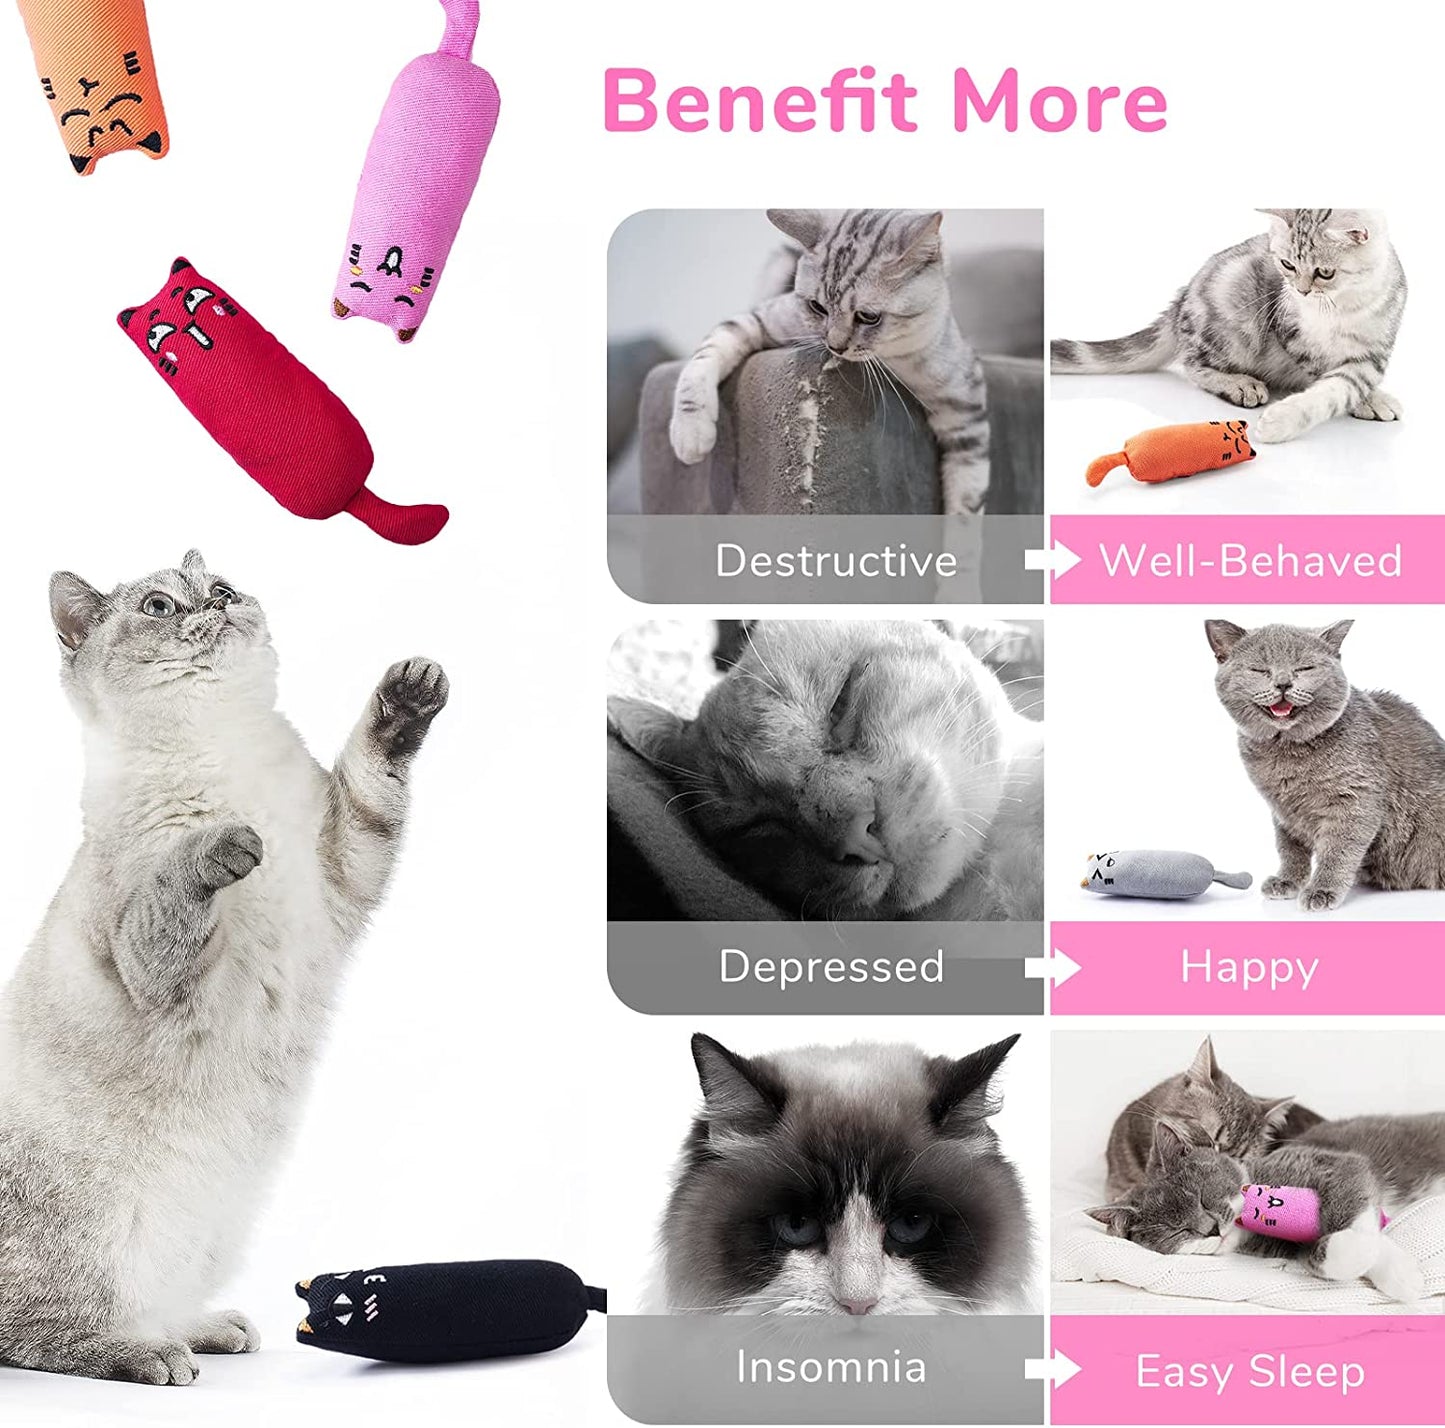 5Pcs Bite Resistant Catnip Toy for Cats,Catnip Filled Cartoon Mice Cat Teething Chew Toy